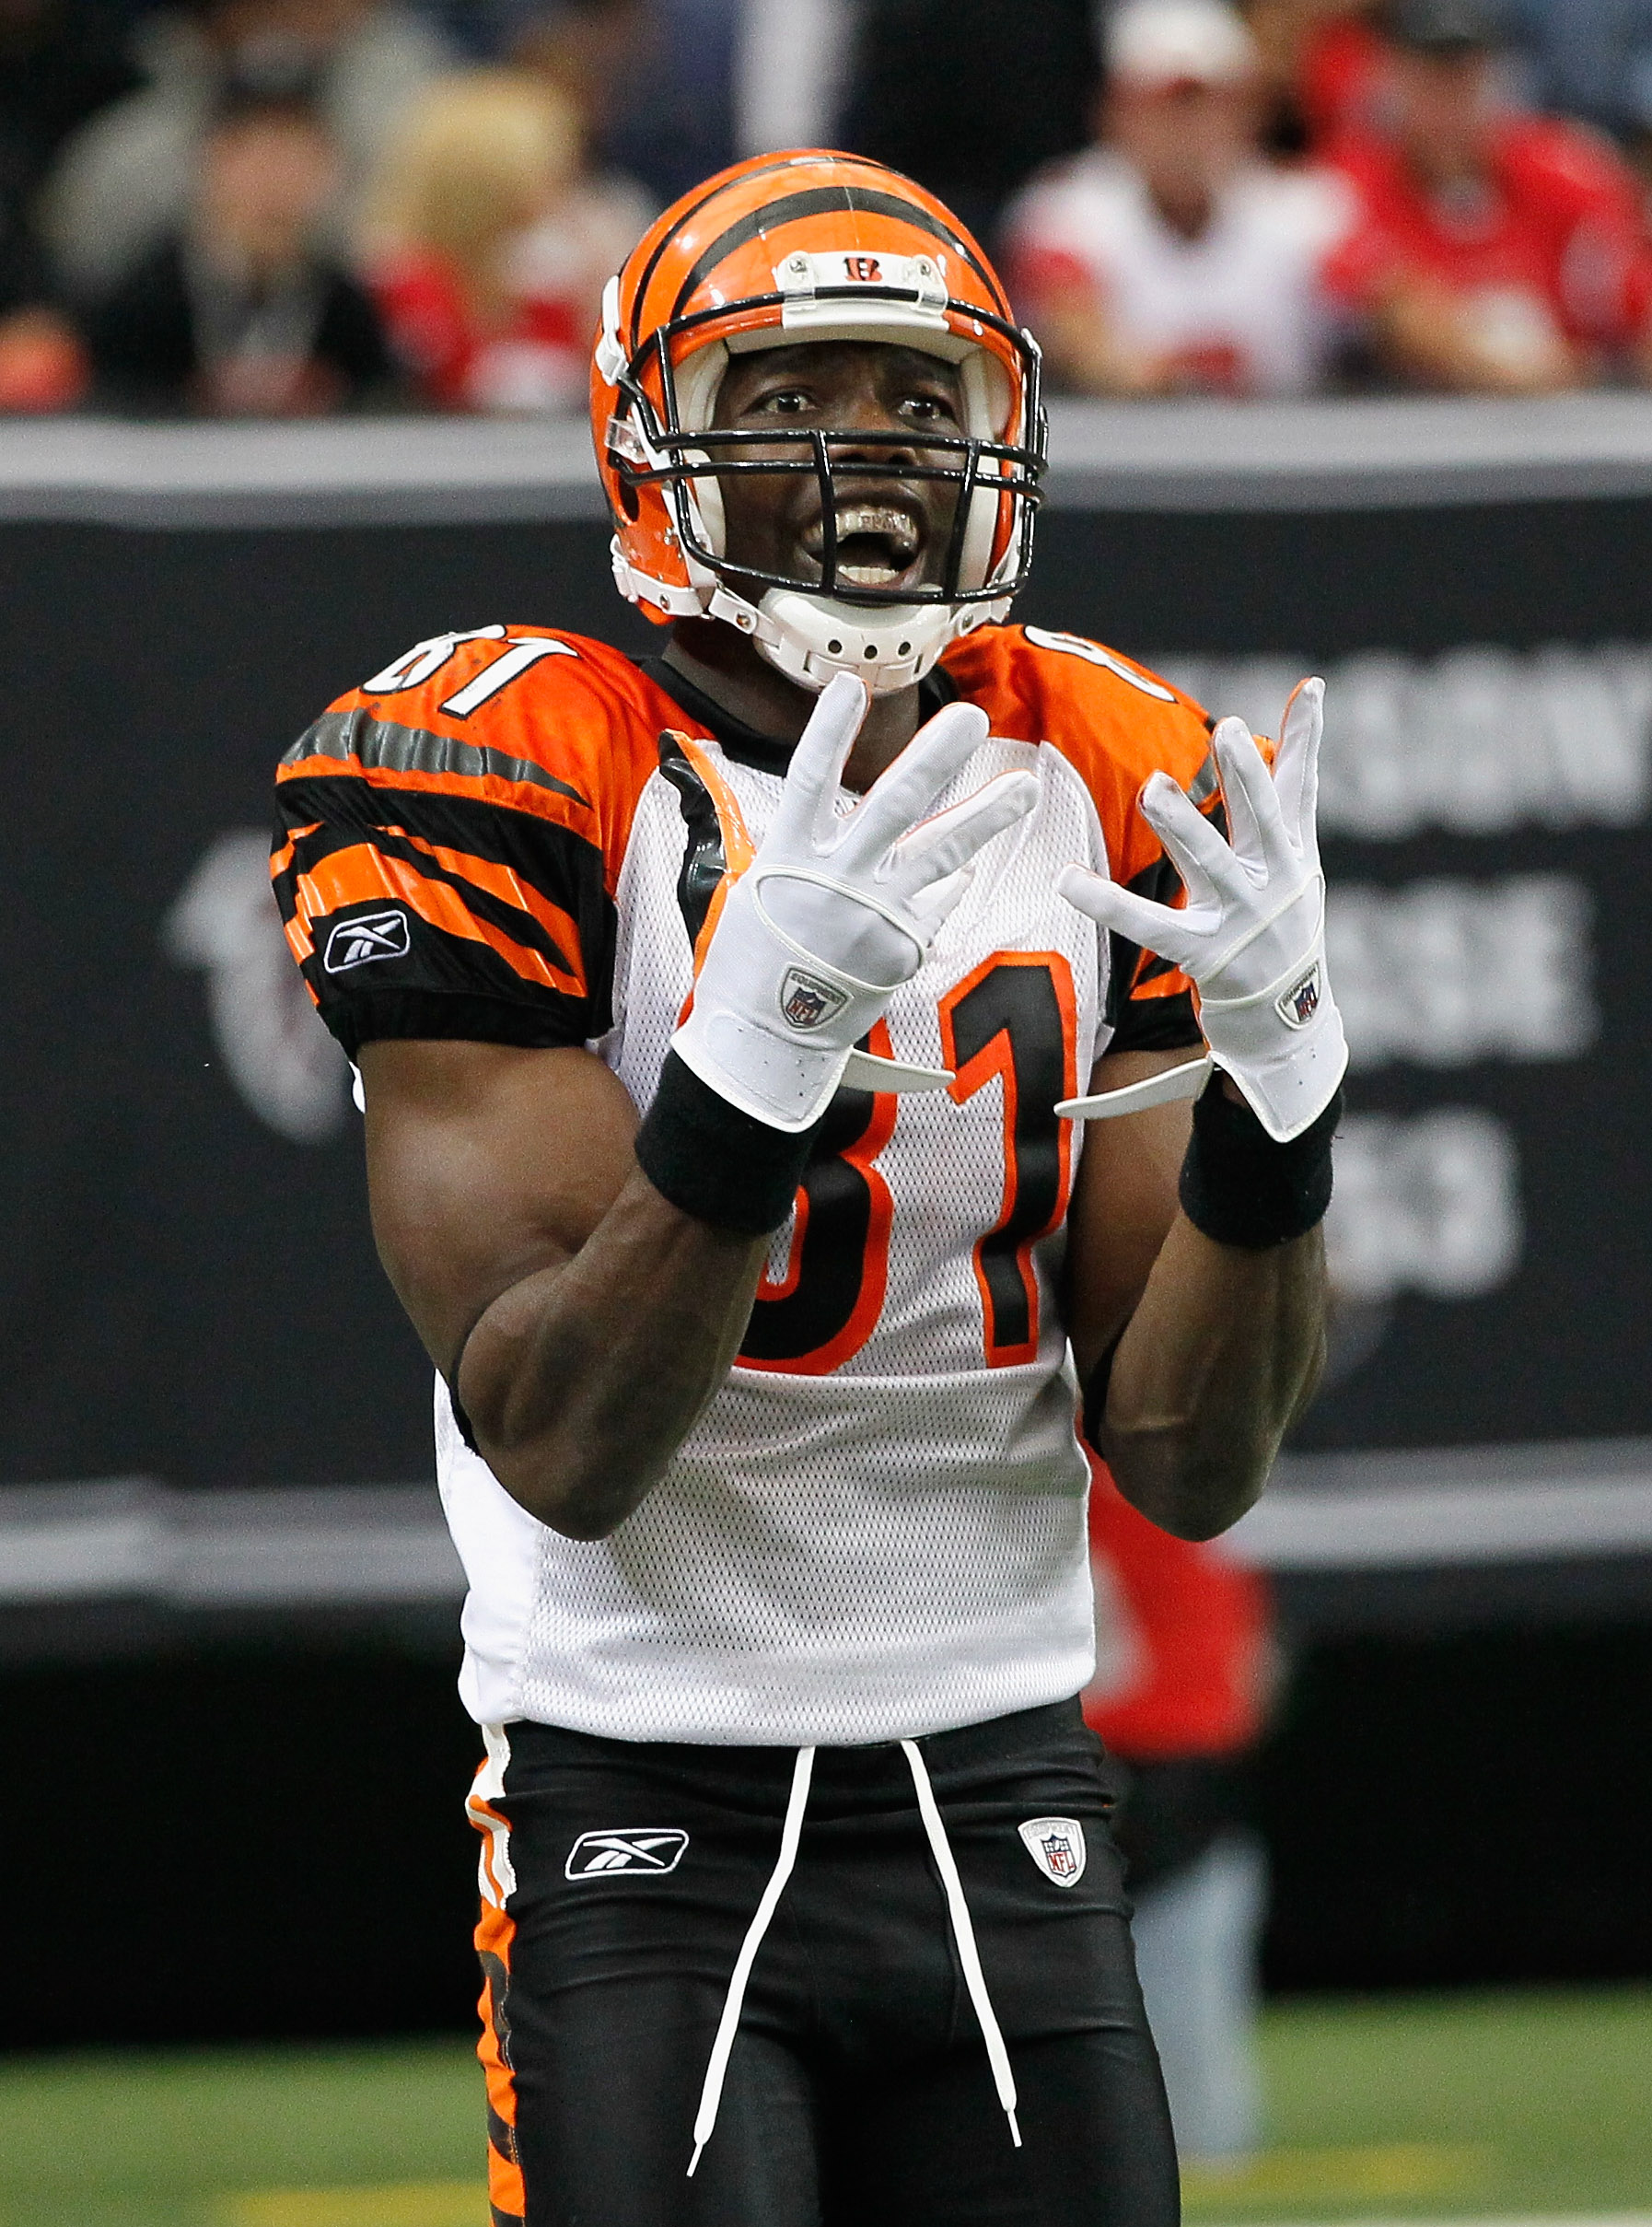 NFL great Terrell Owens involved in car wreck